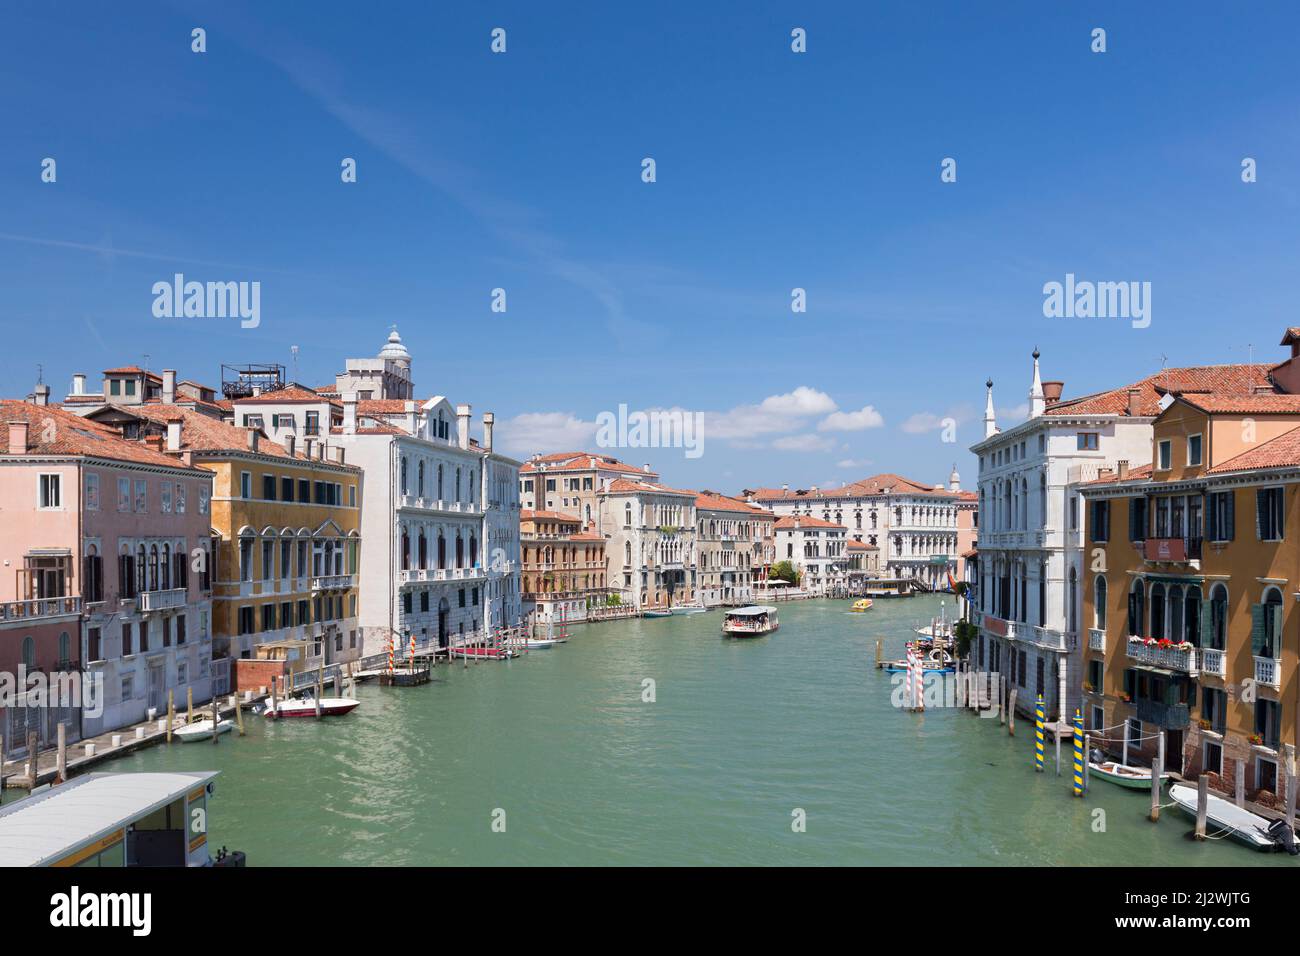 View of Venice and the Grand Canal, Venice, Italy Stock Photo